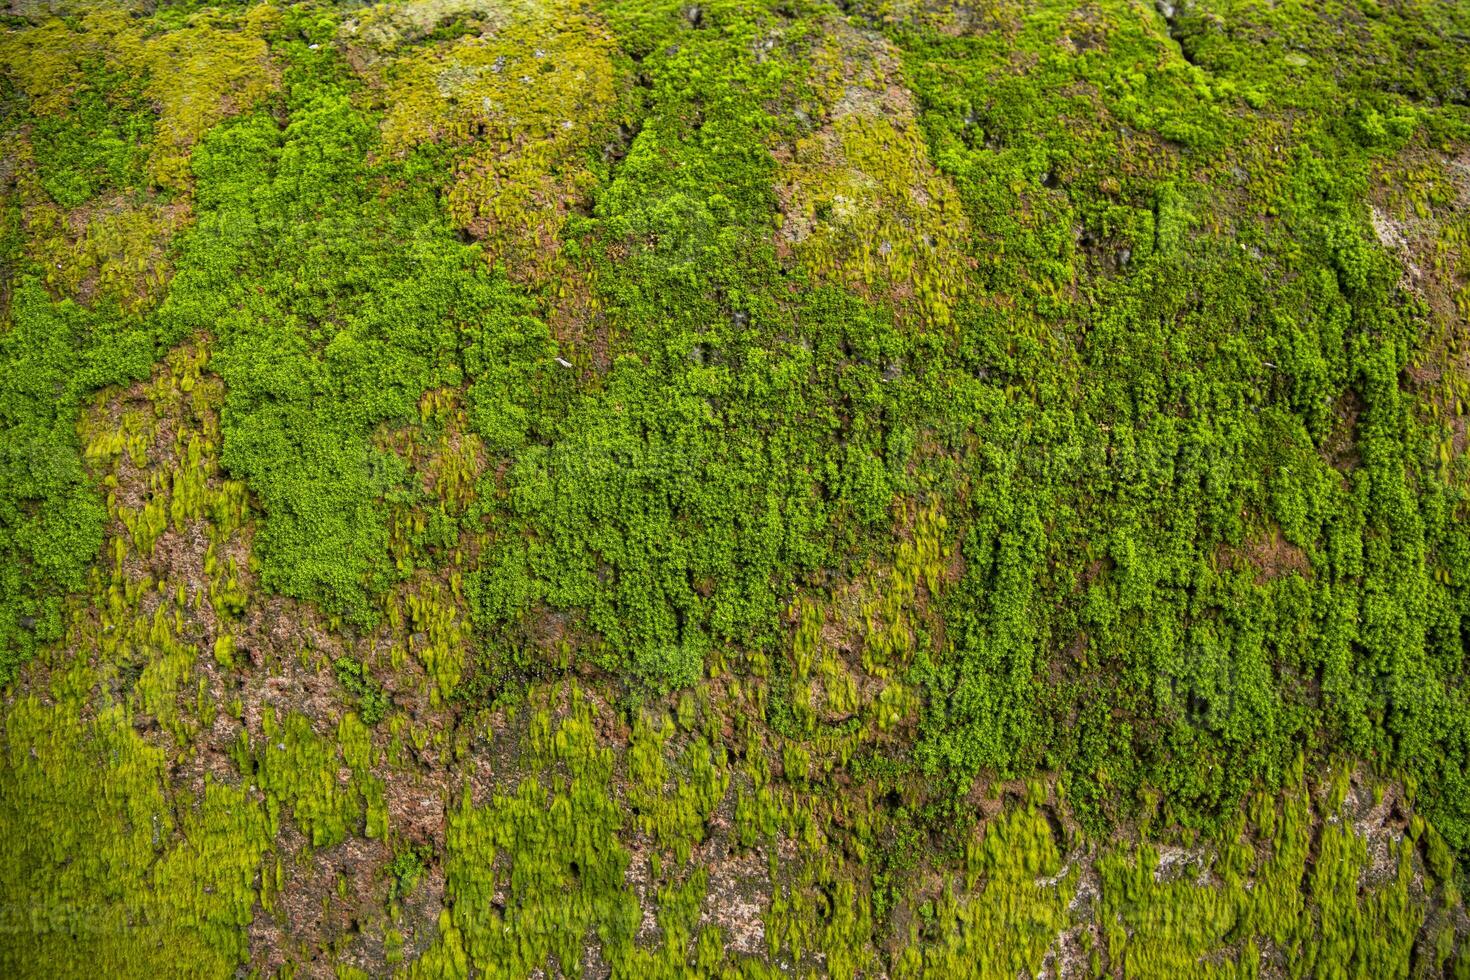 Fungi Green Moss old concrete wall abstract Texture background wallpaper. Rusty, Grungy, Gritty Vintage Background photo